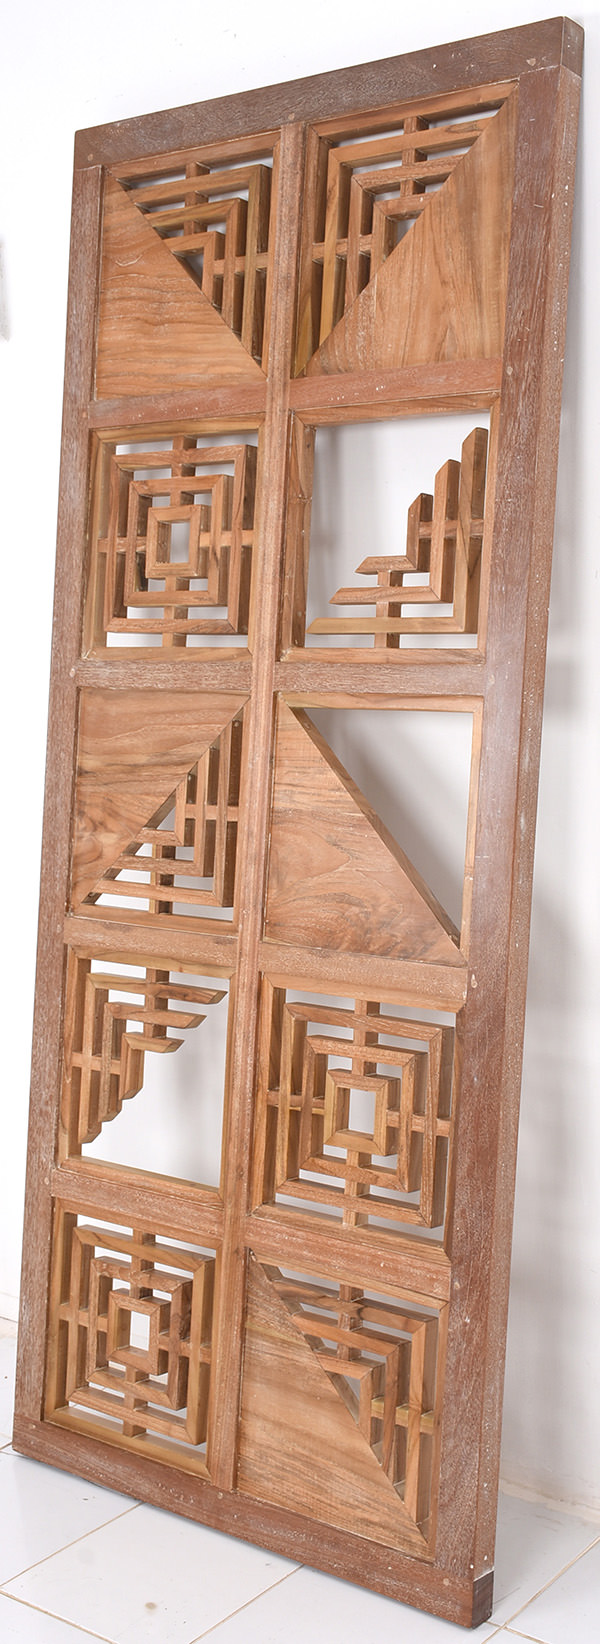 teak wooden divider with geometric pattern